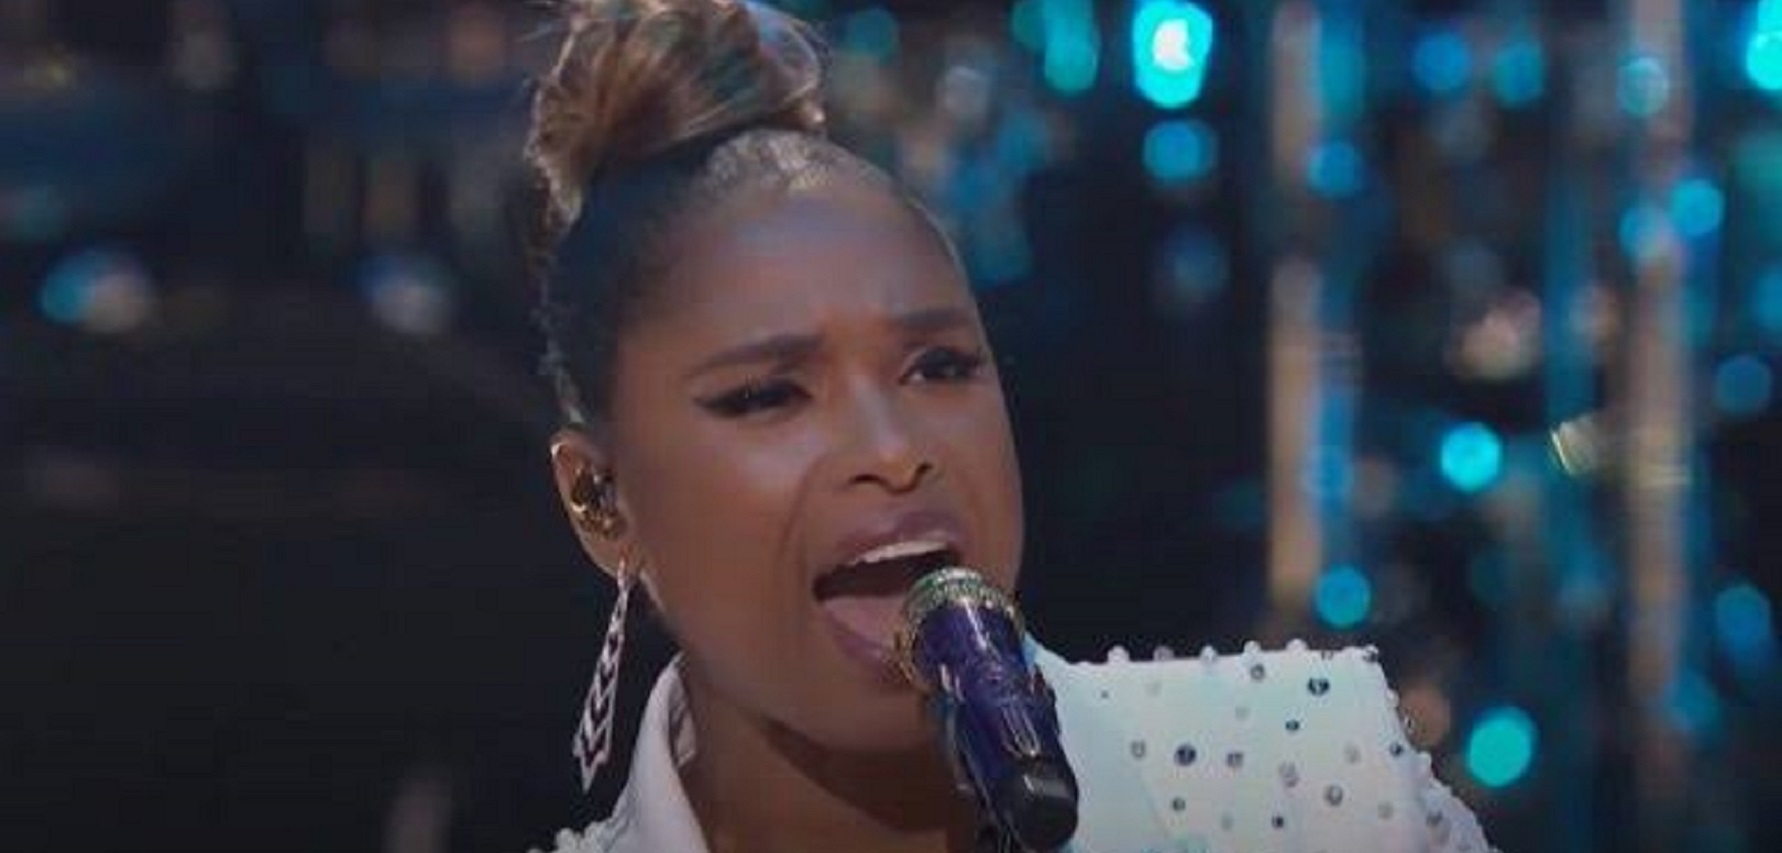 Jennifer Hudson Stuns With Powerful Performance of ‘Hallelujah’ at Global Citizen Prize Event!